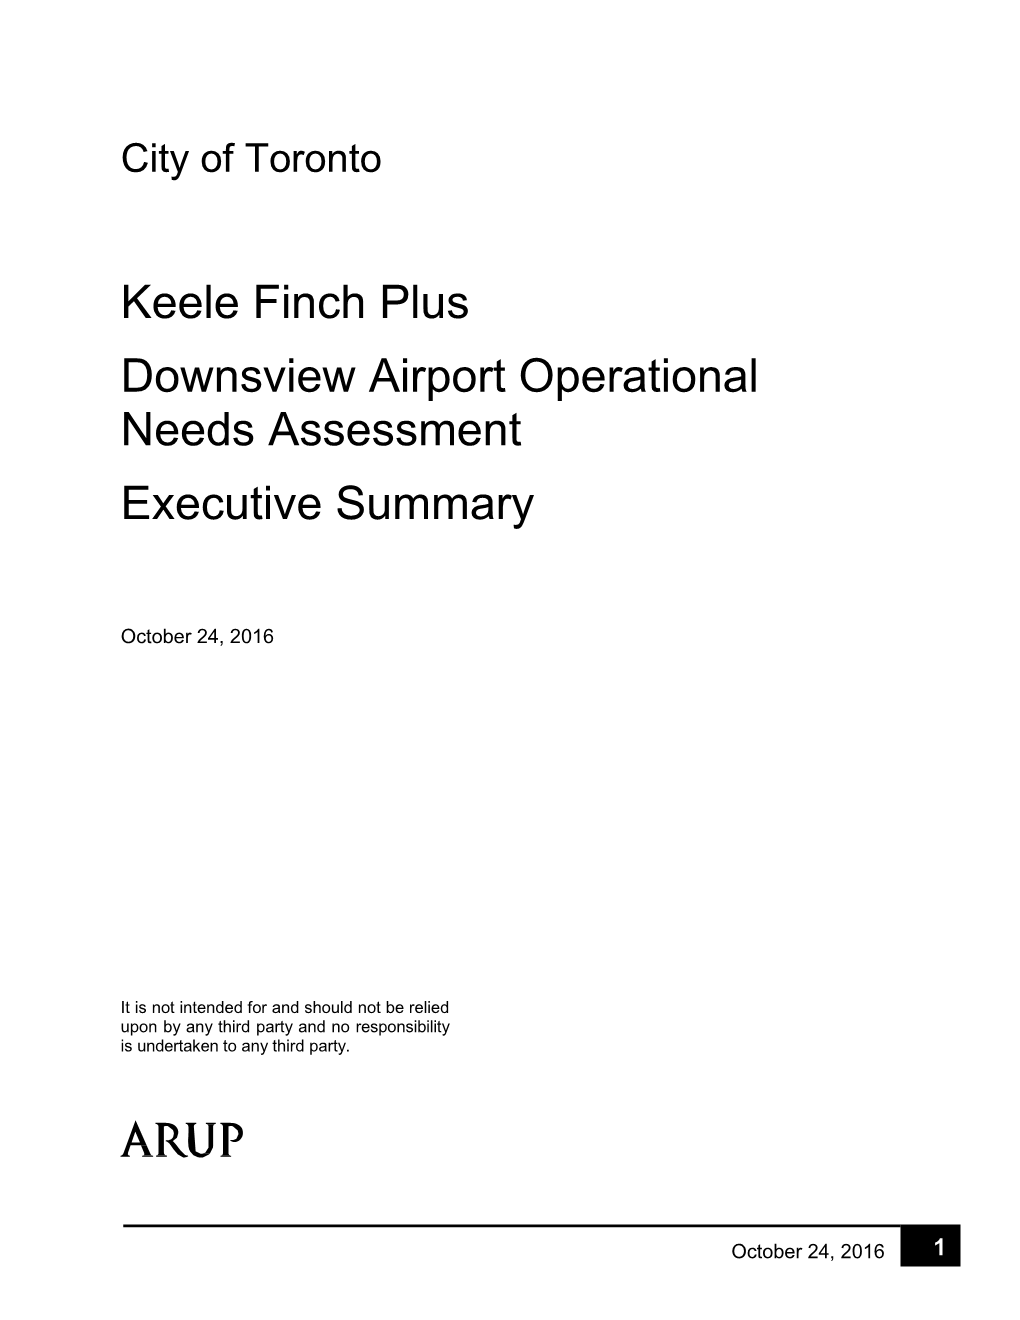 Keele Finch Plus Downsview Airport Operational Needs Assessment Executive Summary